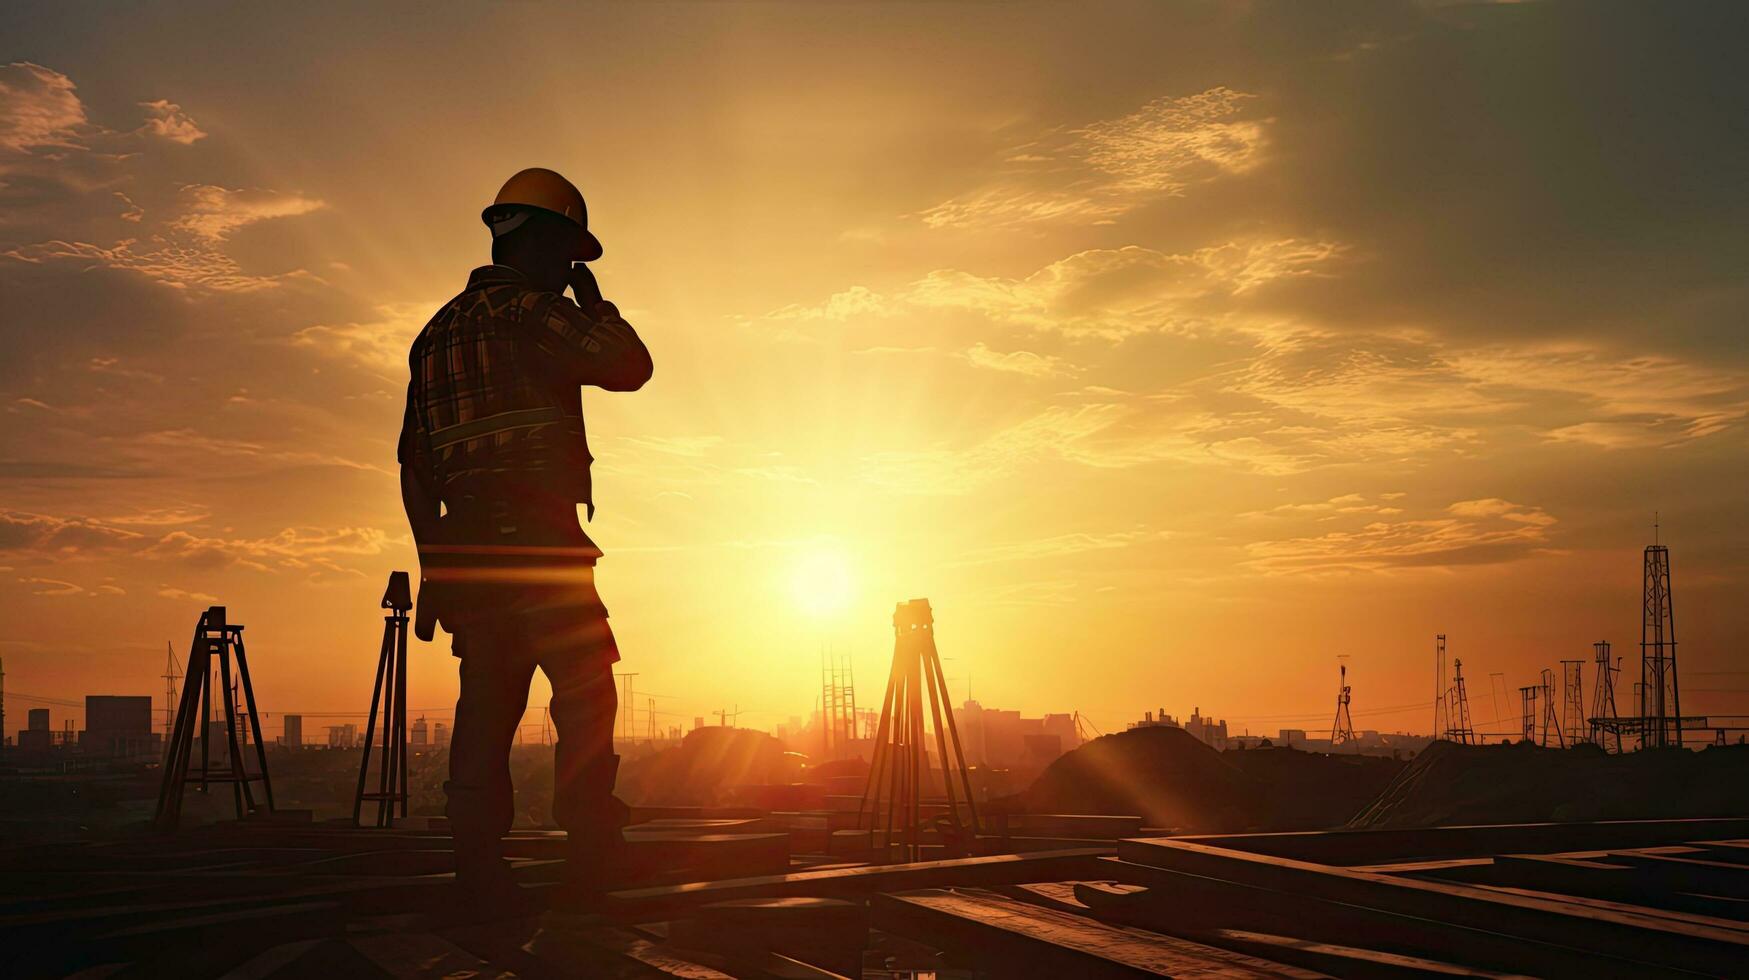 Engineer instructing construction crews to work safely on elevated terrain amid a picturesque sunset photo